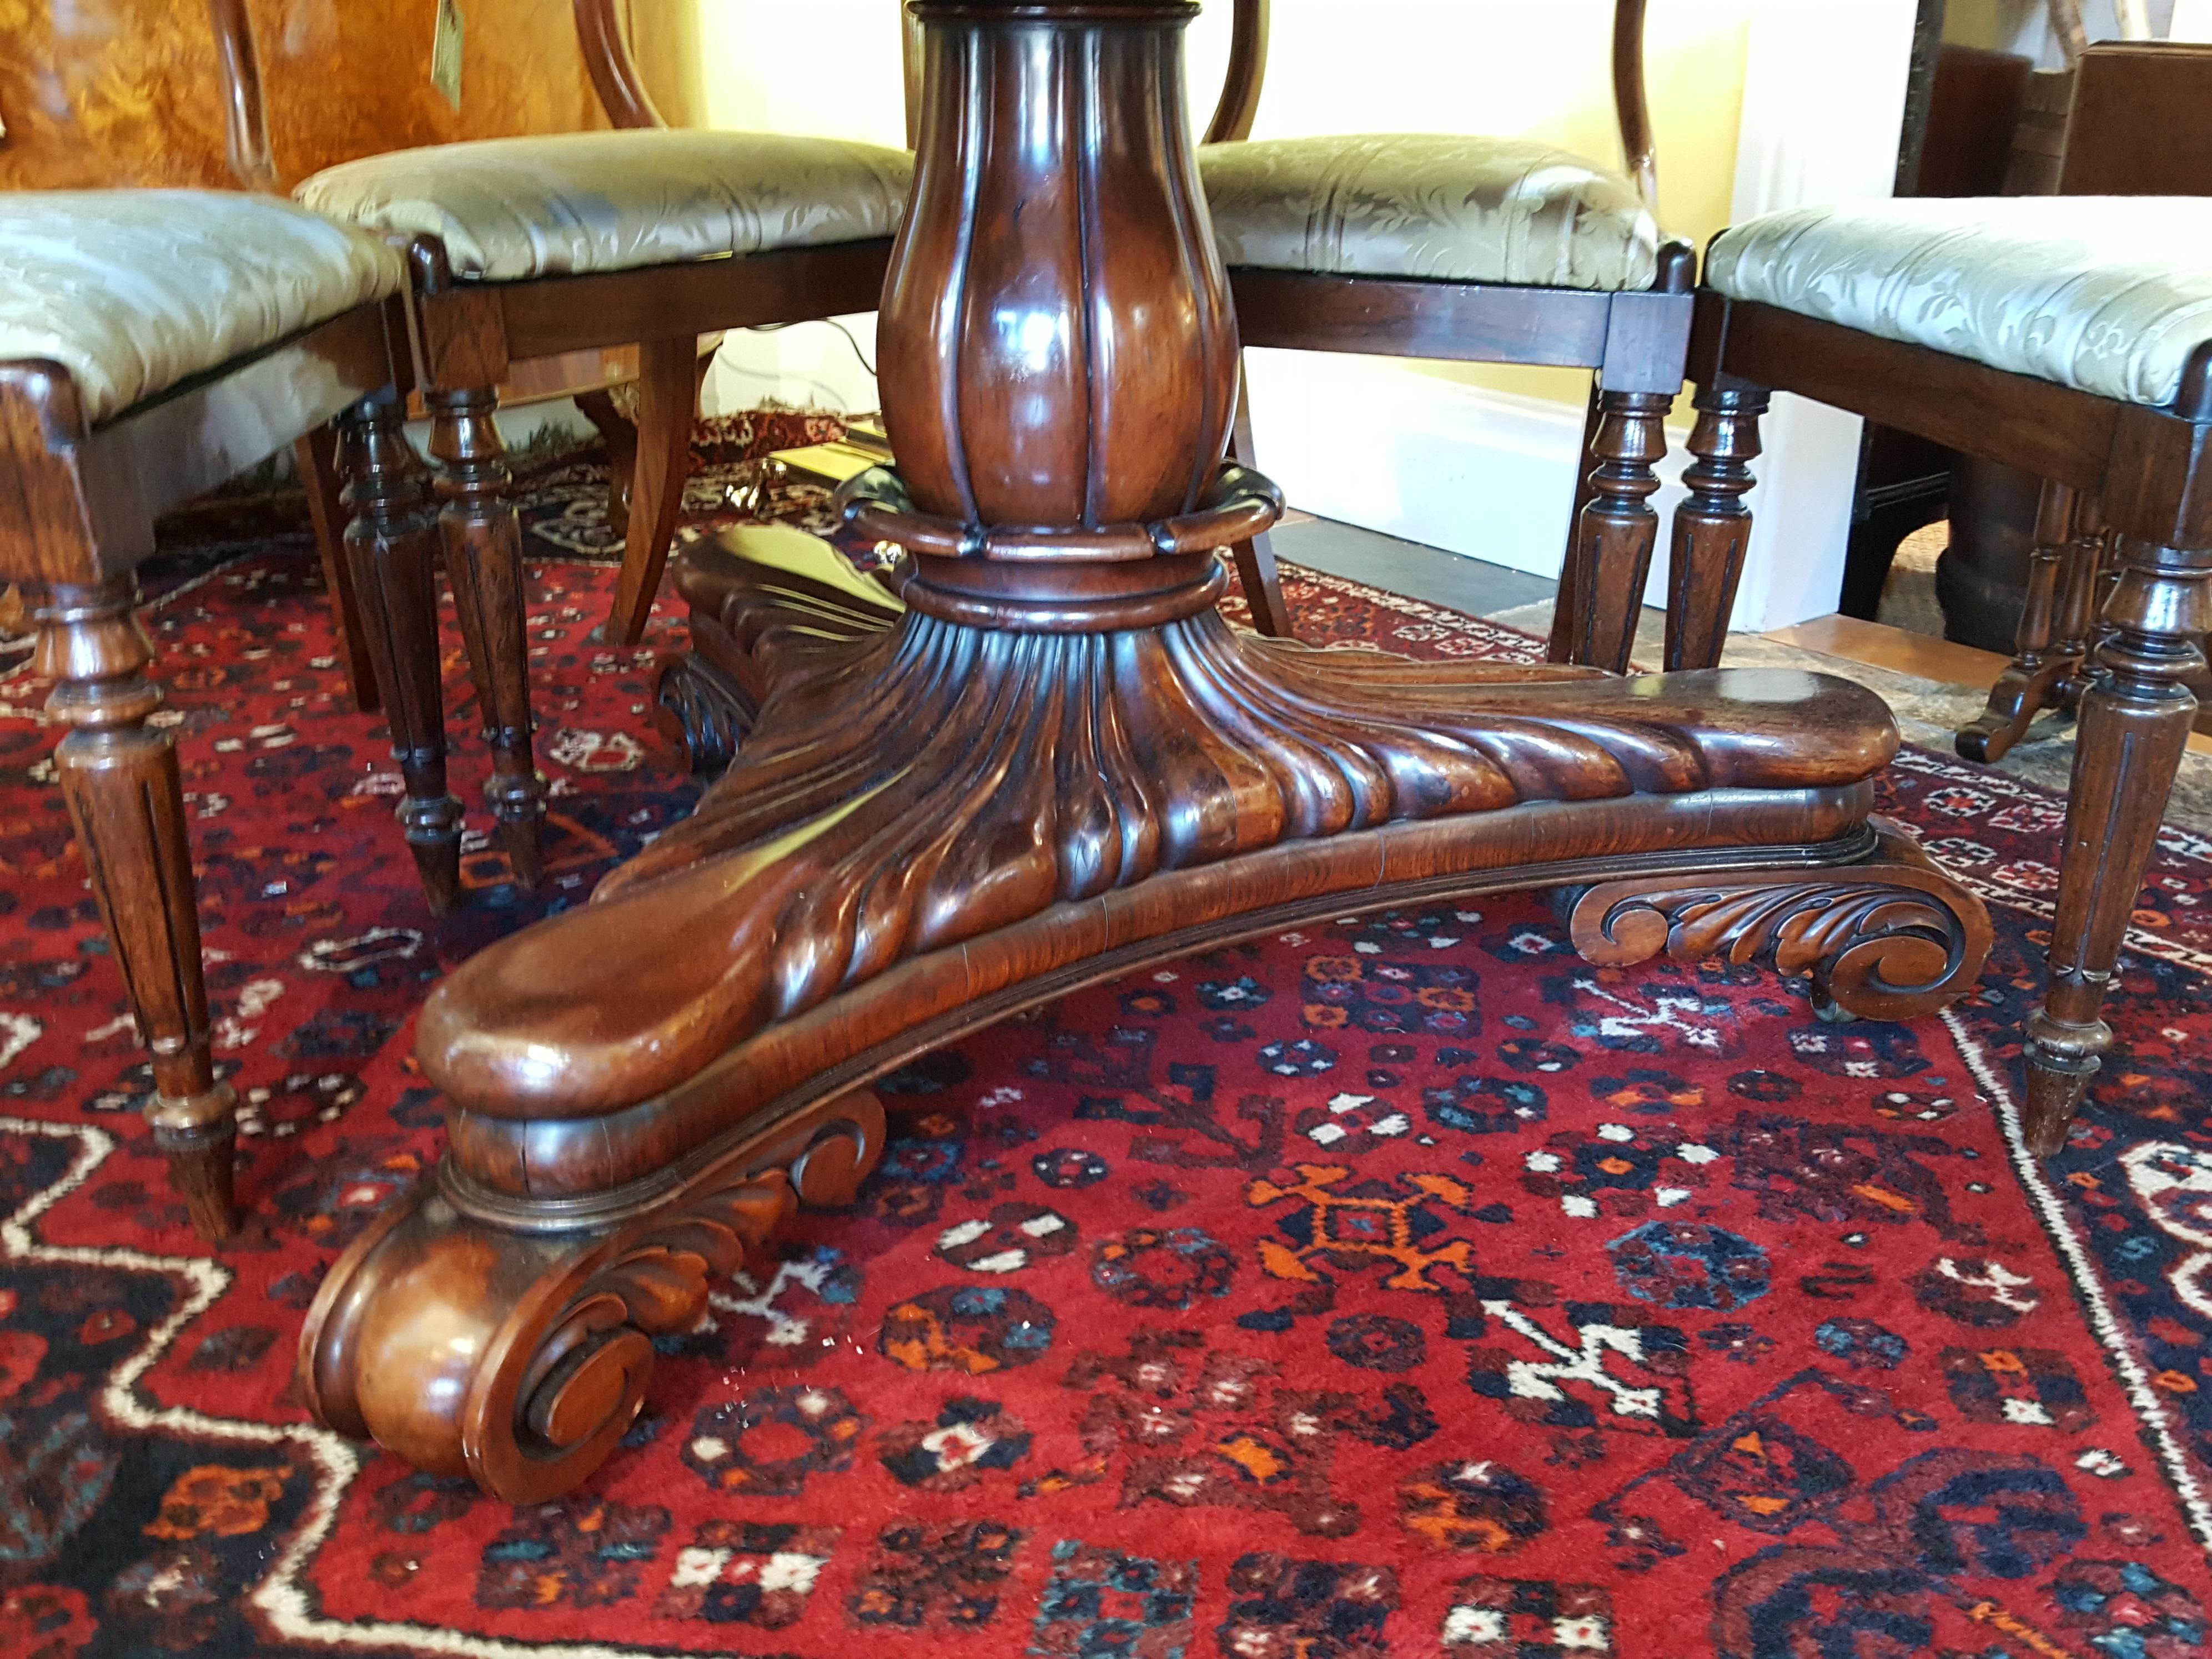 Large Late Regency Circular Rosewood Dining Table im Zustand „Gut“ im Angebot in Altrincham, Cheshire